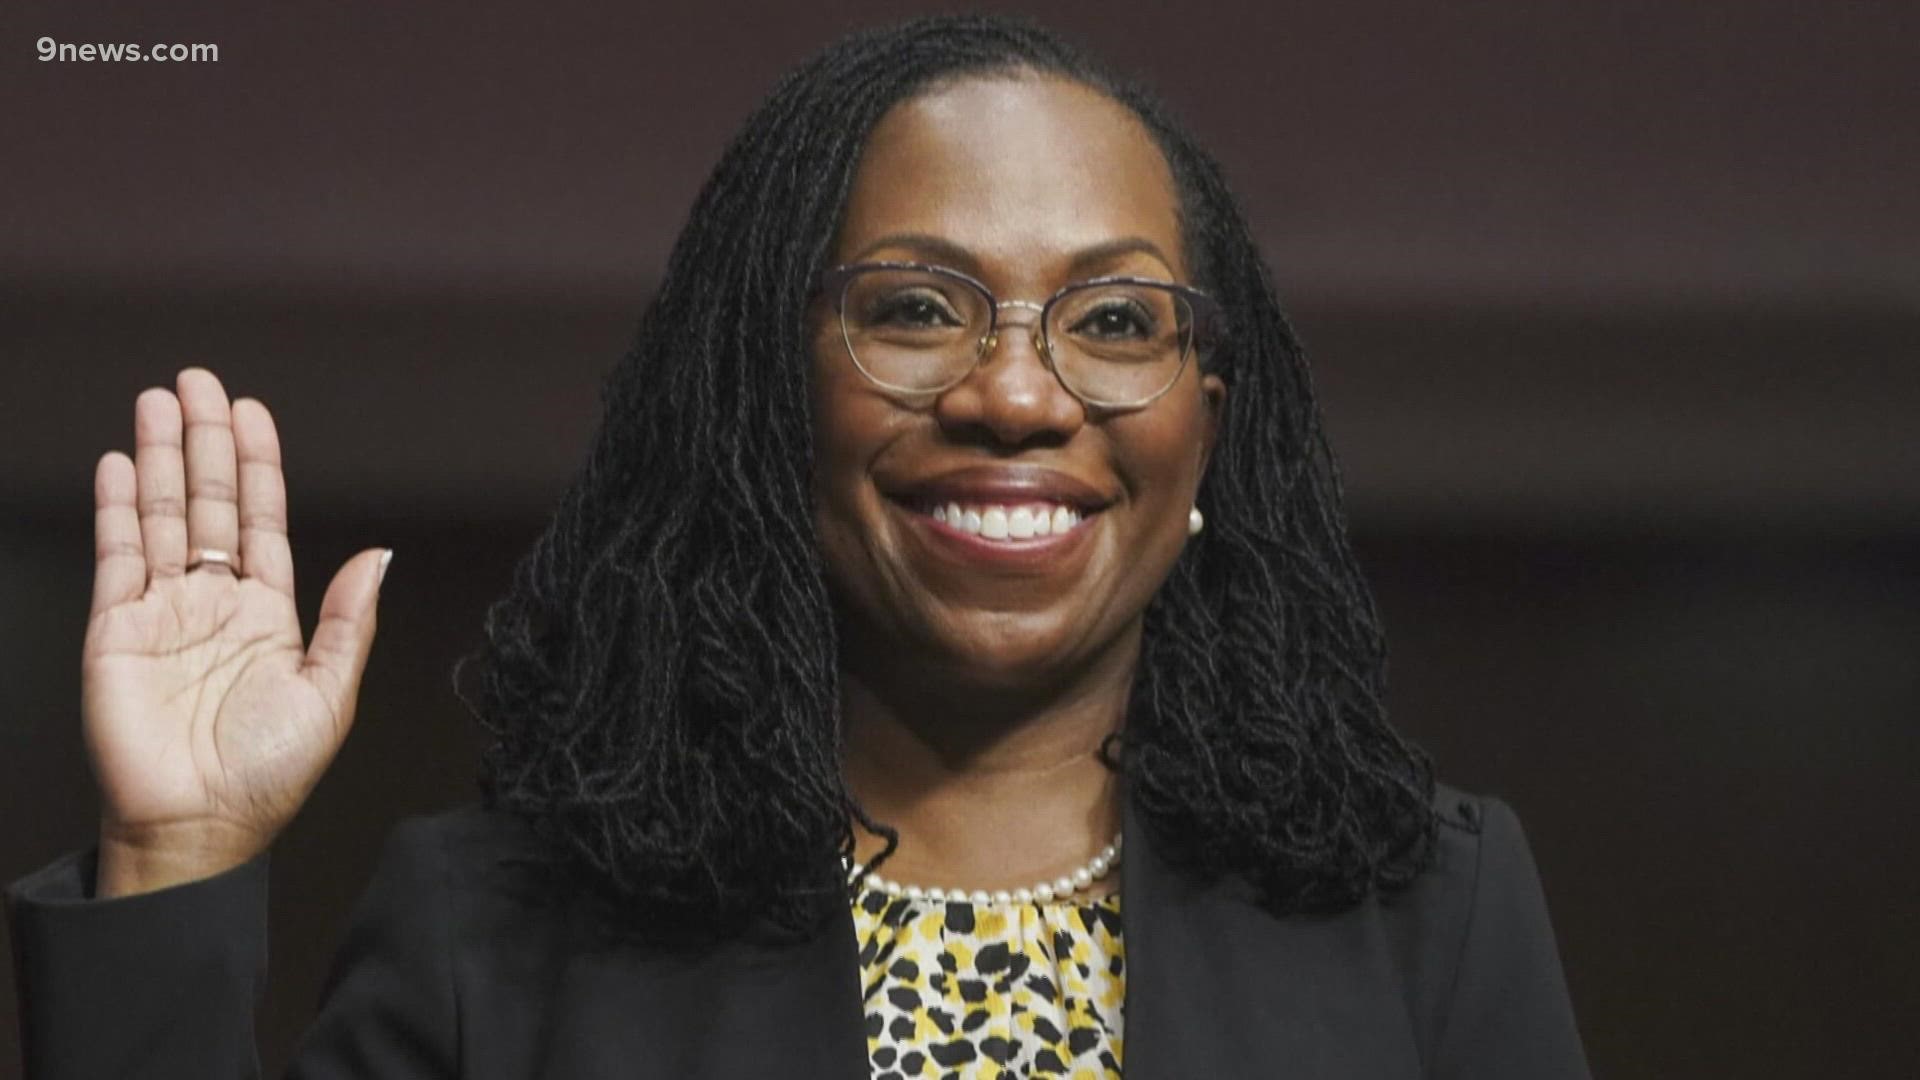 Karen Ashby was the first Black woman appointed to the Colorado Court of Appeals. It happened in 2013. Today she reflects on Ketanji Brown Jackson's nomination.